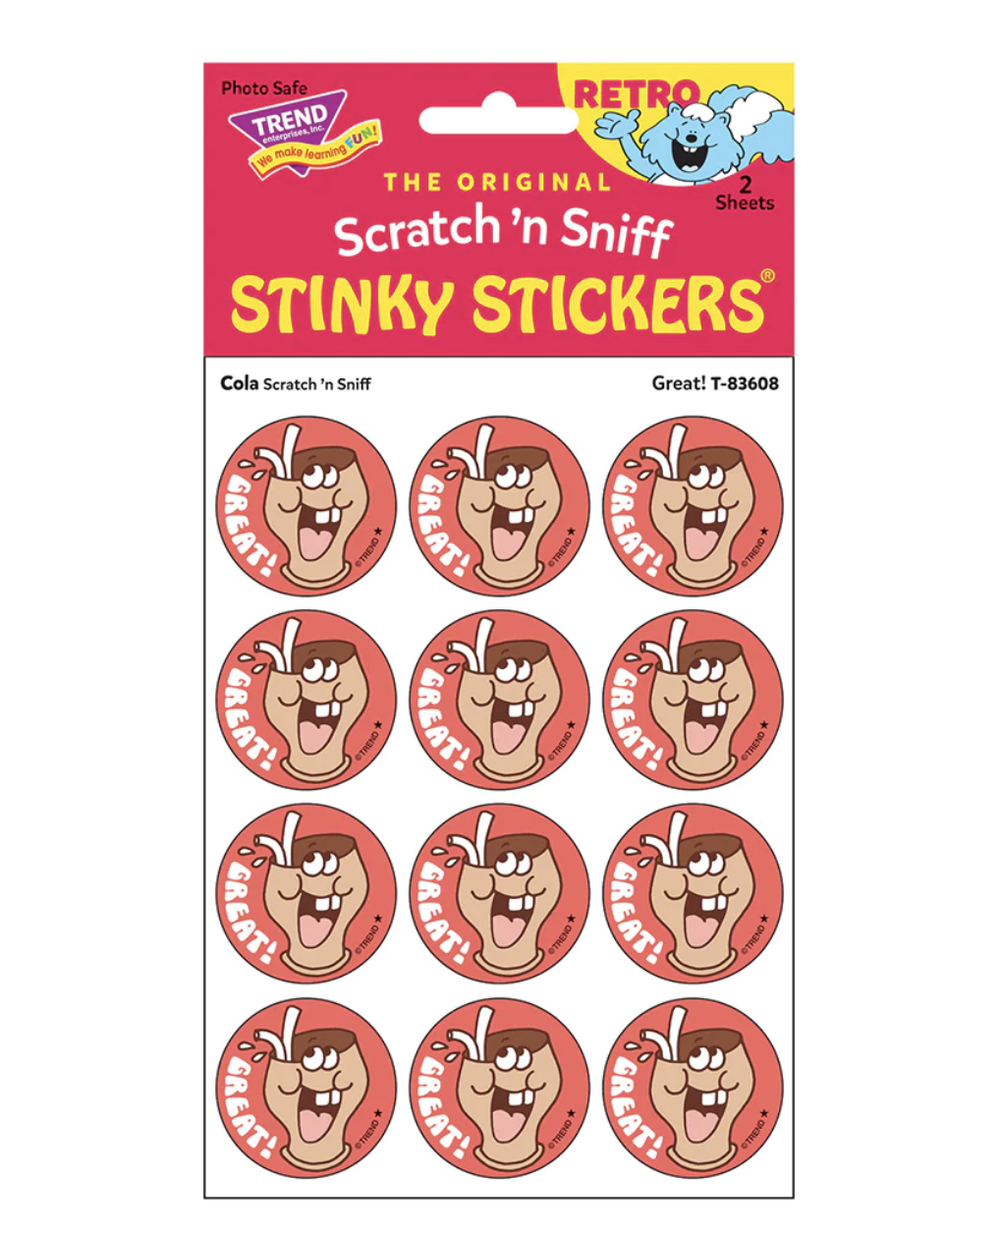 Trend All In Good Pun Retro Scratch 'n Sniff Stinky Stickers® +